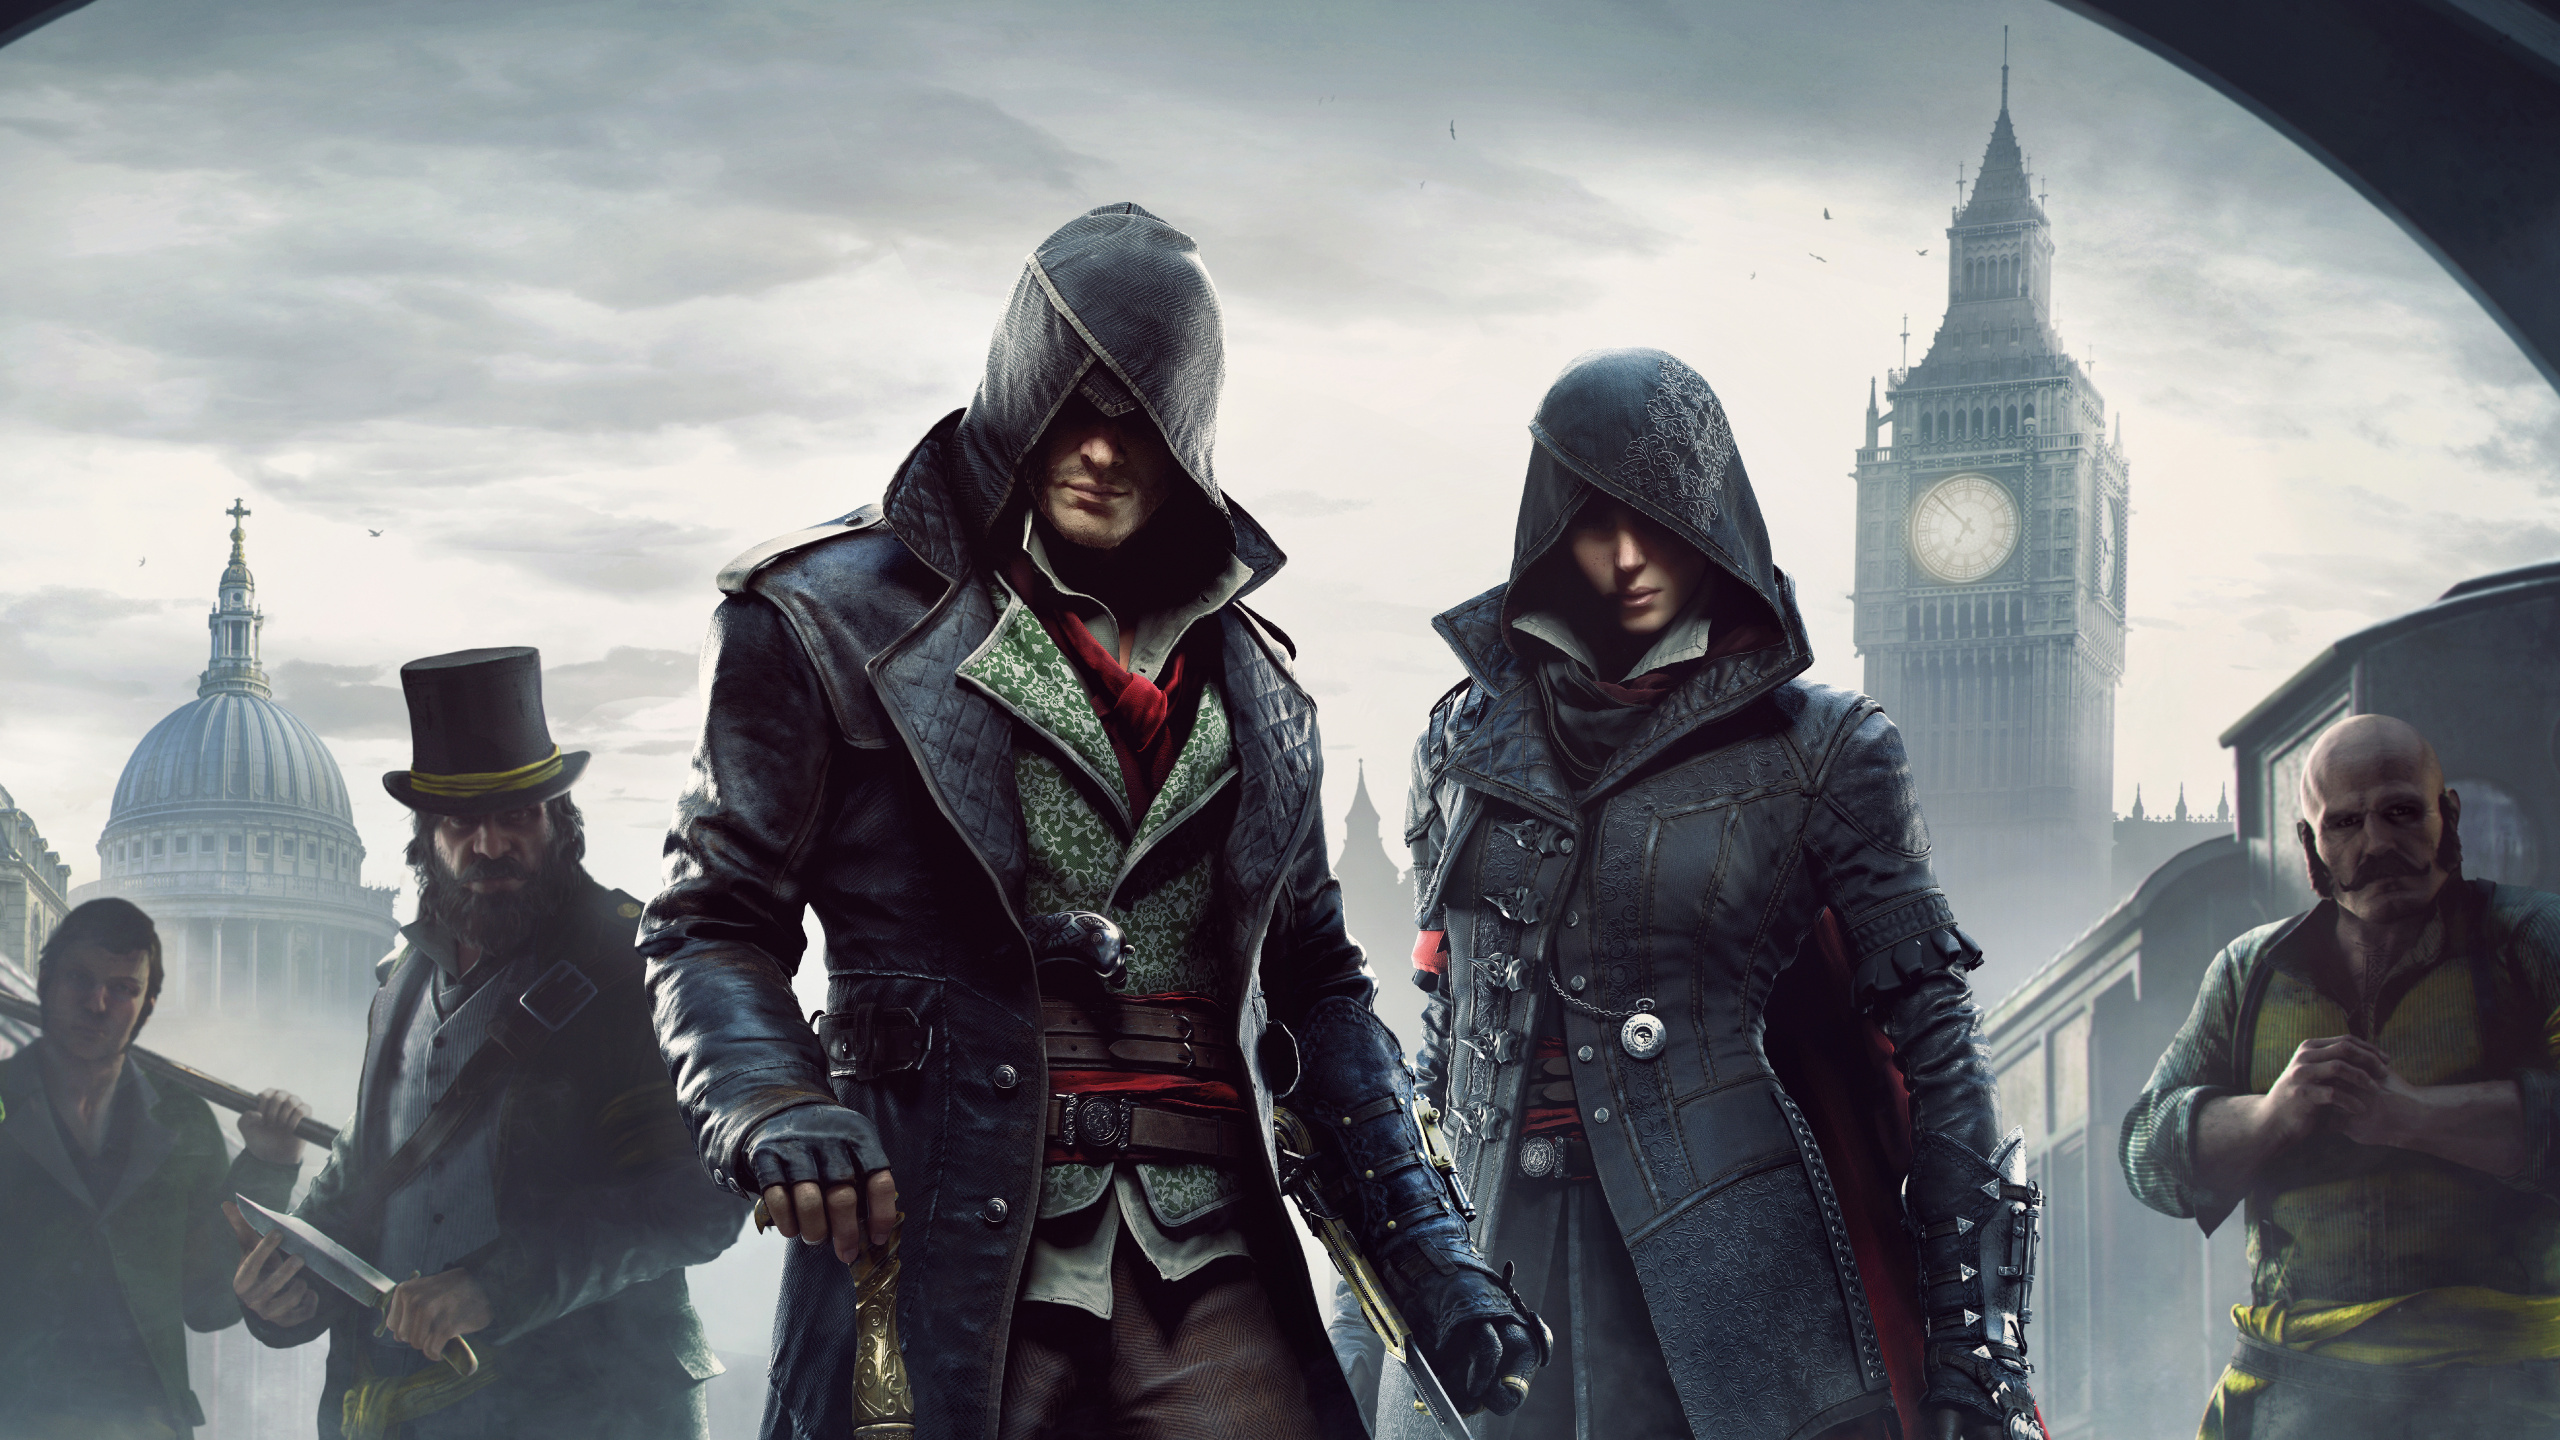 Assassins Creed Syndicate, Ubisoft, pc Game, Film, Assassins Creed Unity. Wallpaper in 2560x1440 Resolution